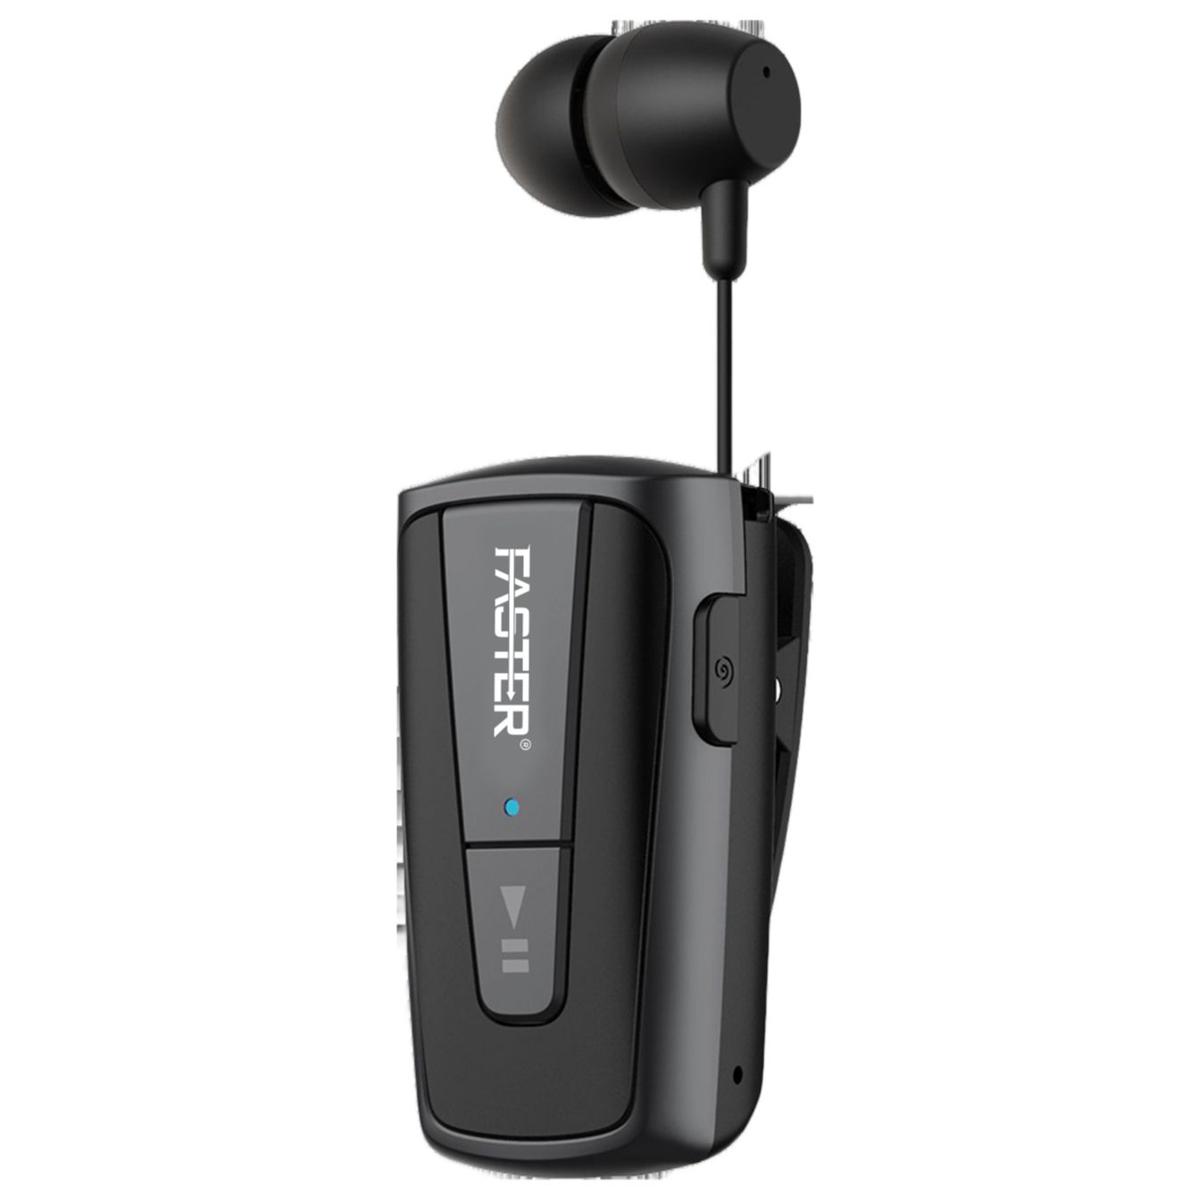 FASTER R12 Pro Retractable Bluetooth Headset Clip-on Earbuds Hands-free with Microphone